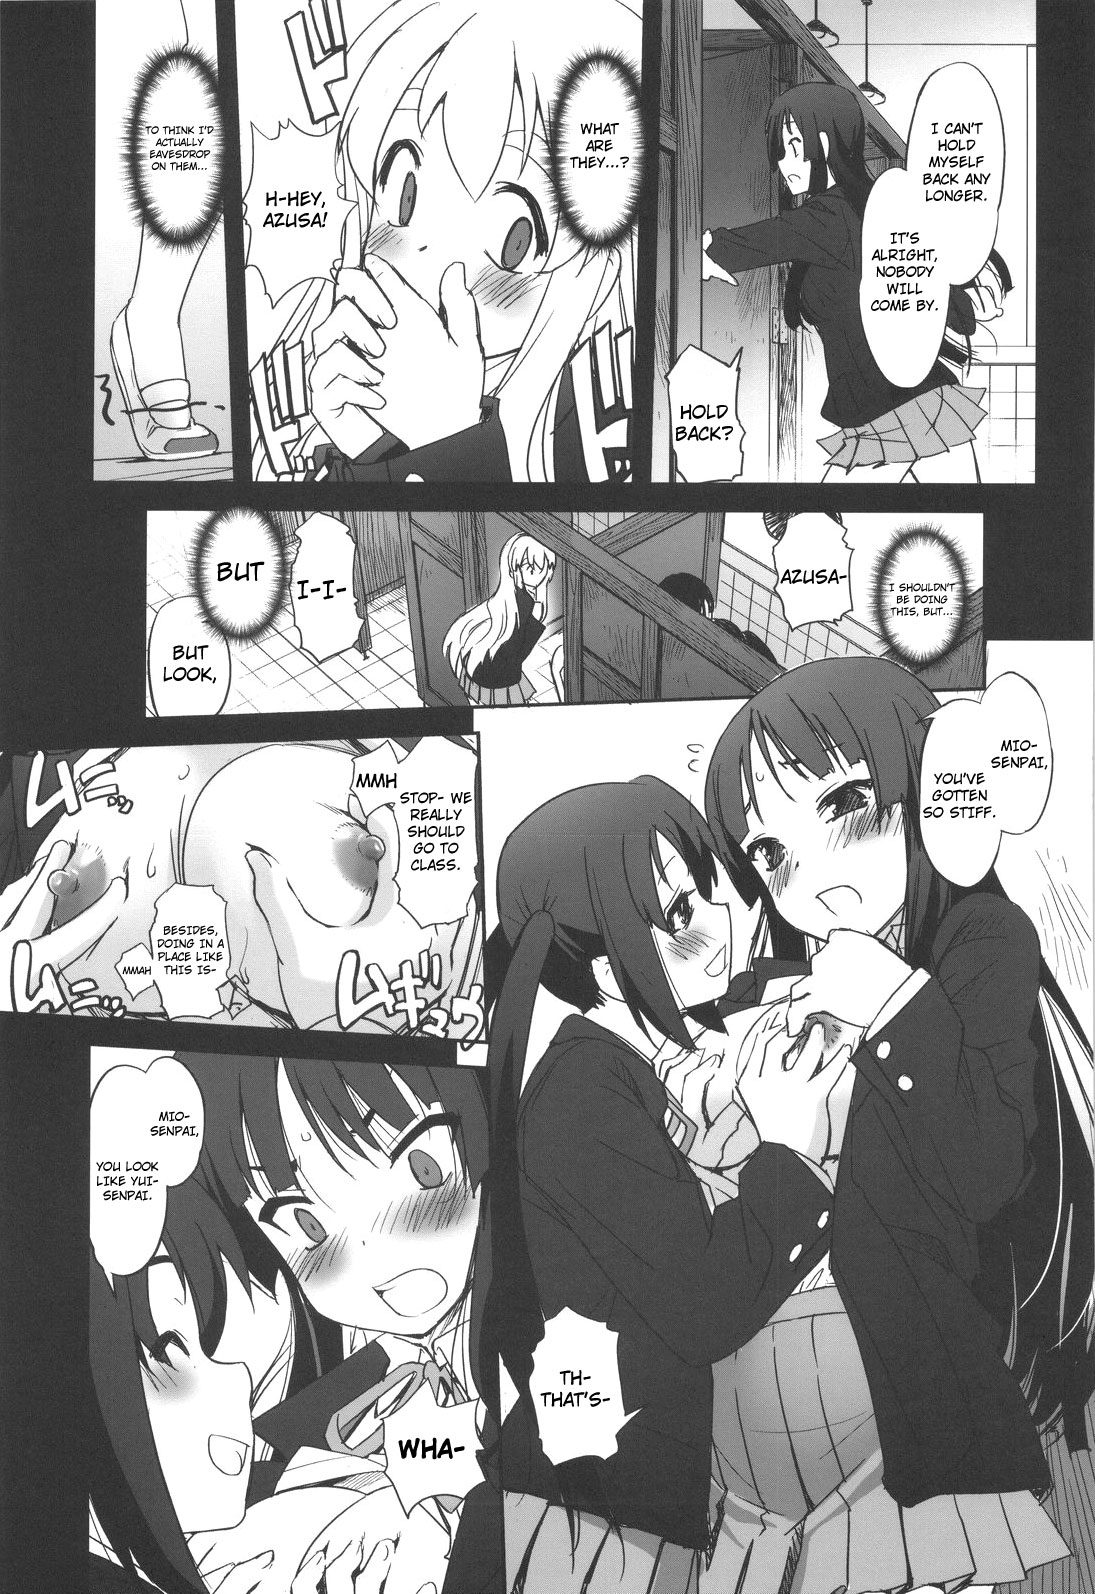 (C76) [G-Power! (Sasayuki)] Nekomimi to Toilet to Houkago no Bushitsu | Cat Ears And A Restroom And The Club Room After School (K-ON) [English] [Nicchiscans-4Dawgz] page 11 full